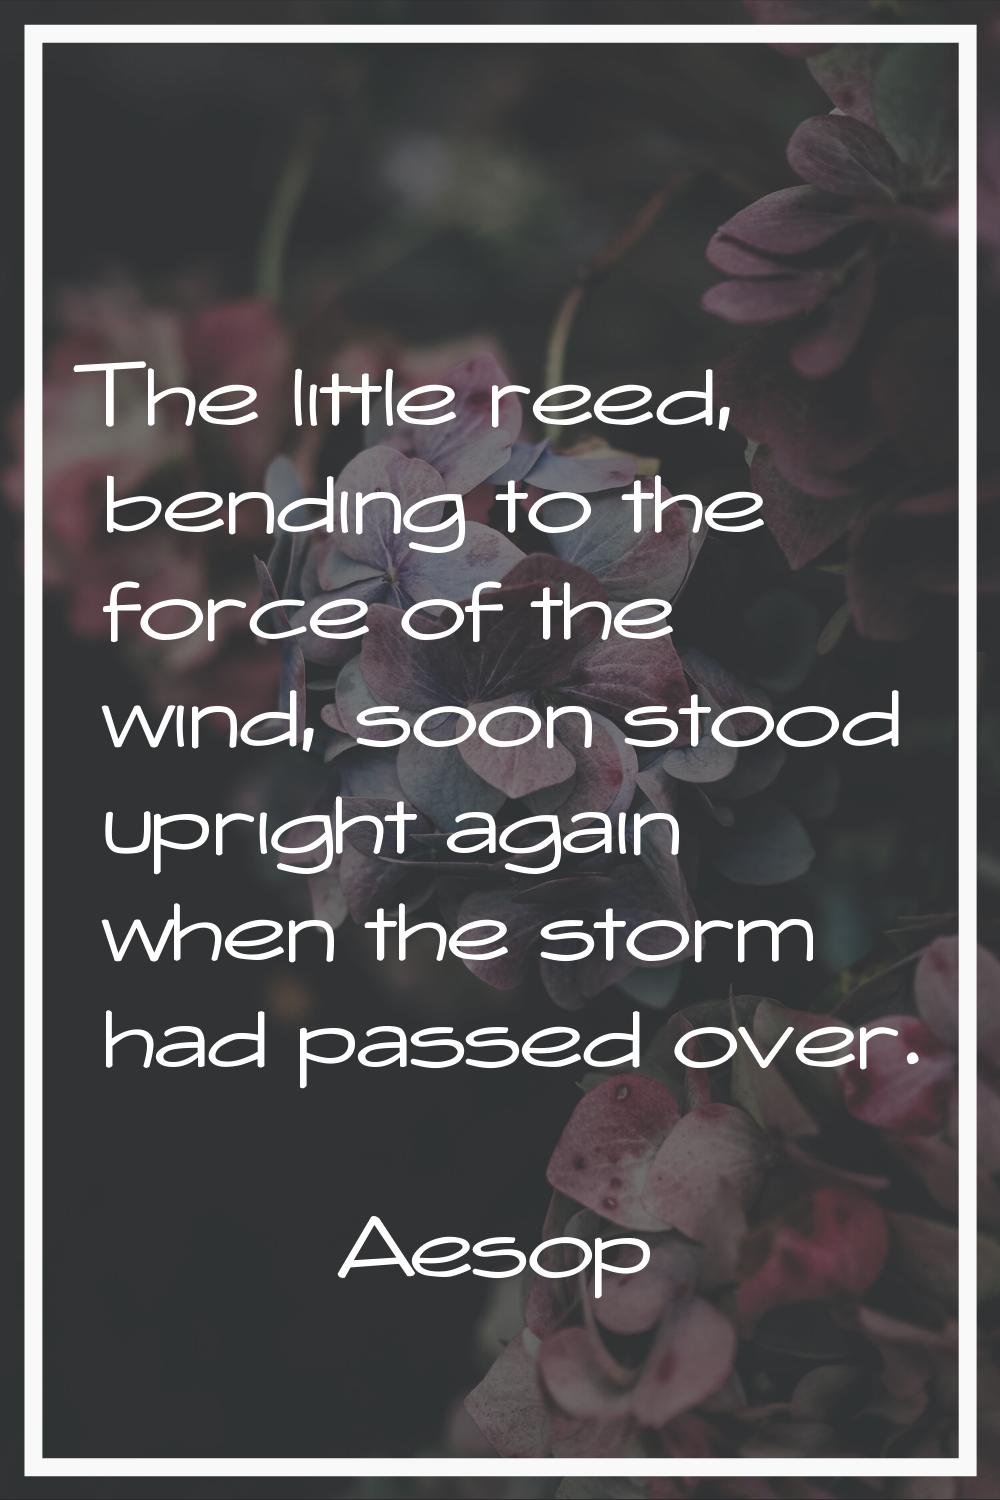 The little reed, bending to the force of the wind, soon stood upright again when the storm had pass